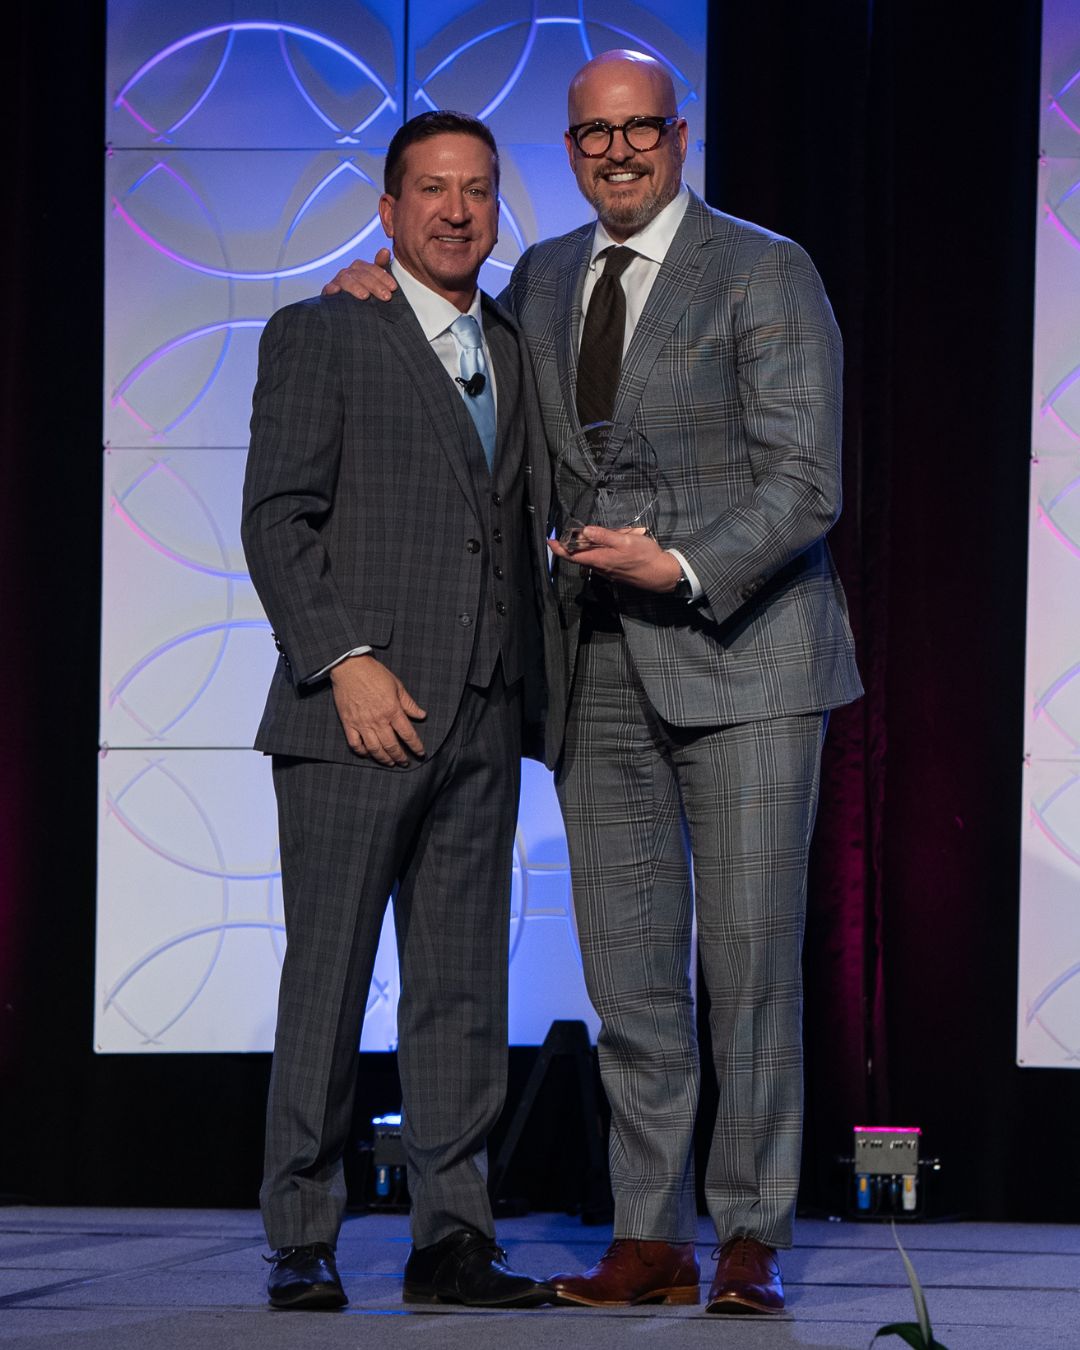 Andy Herf Receives the Chuck Freiburger Business Partner of the Year Award